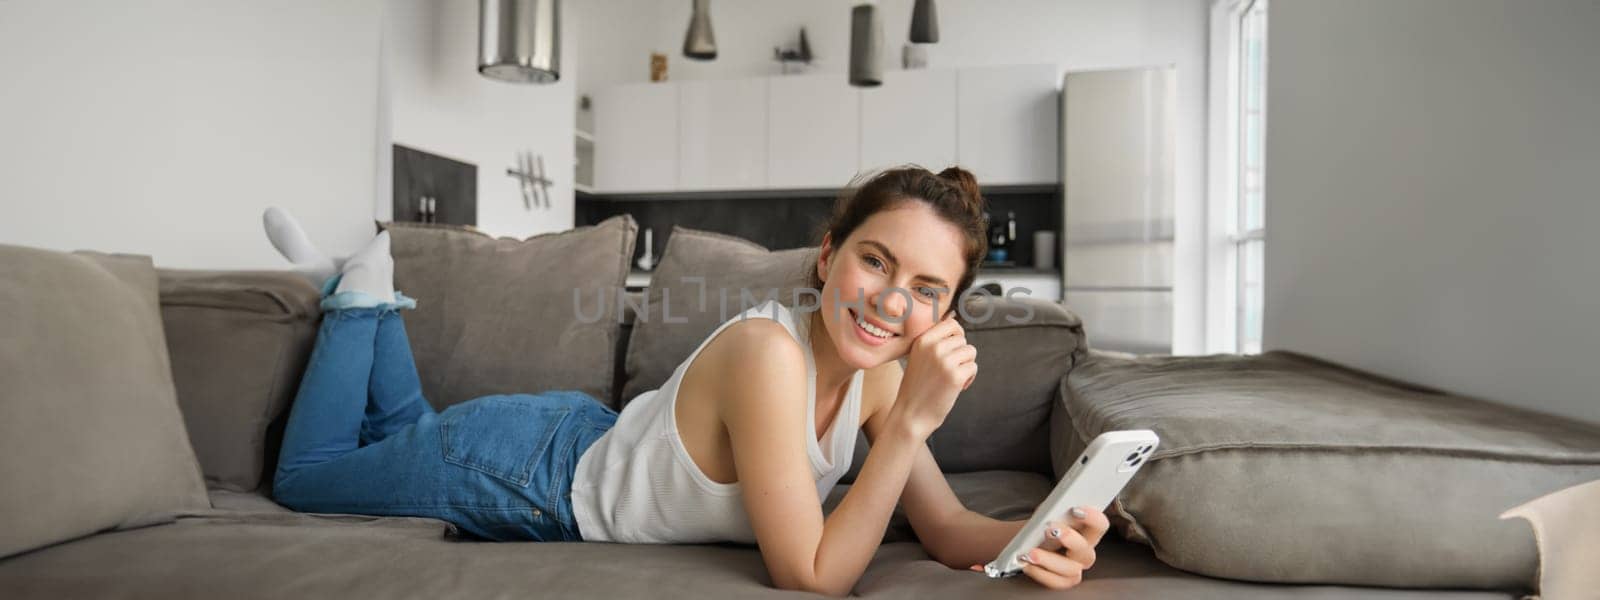 Portrait of cute, happy young woman lying on couch, holding mobile phone, using smartphone while relaxing at home in living room, concept of lifestyle and people leisure.